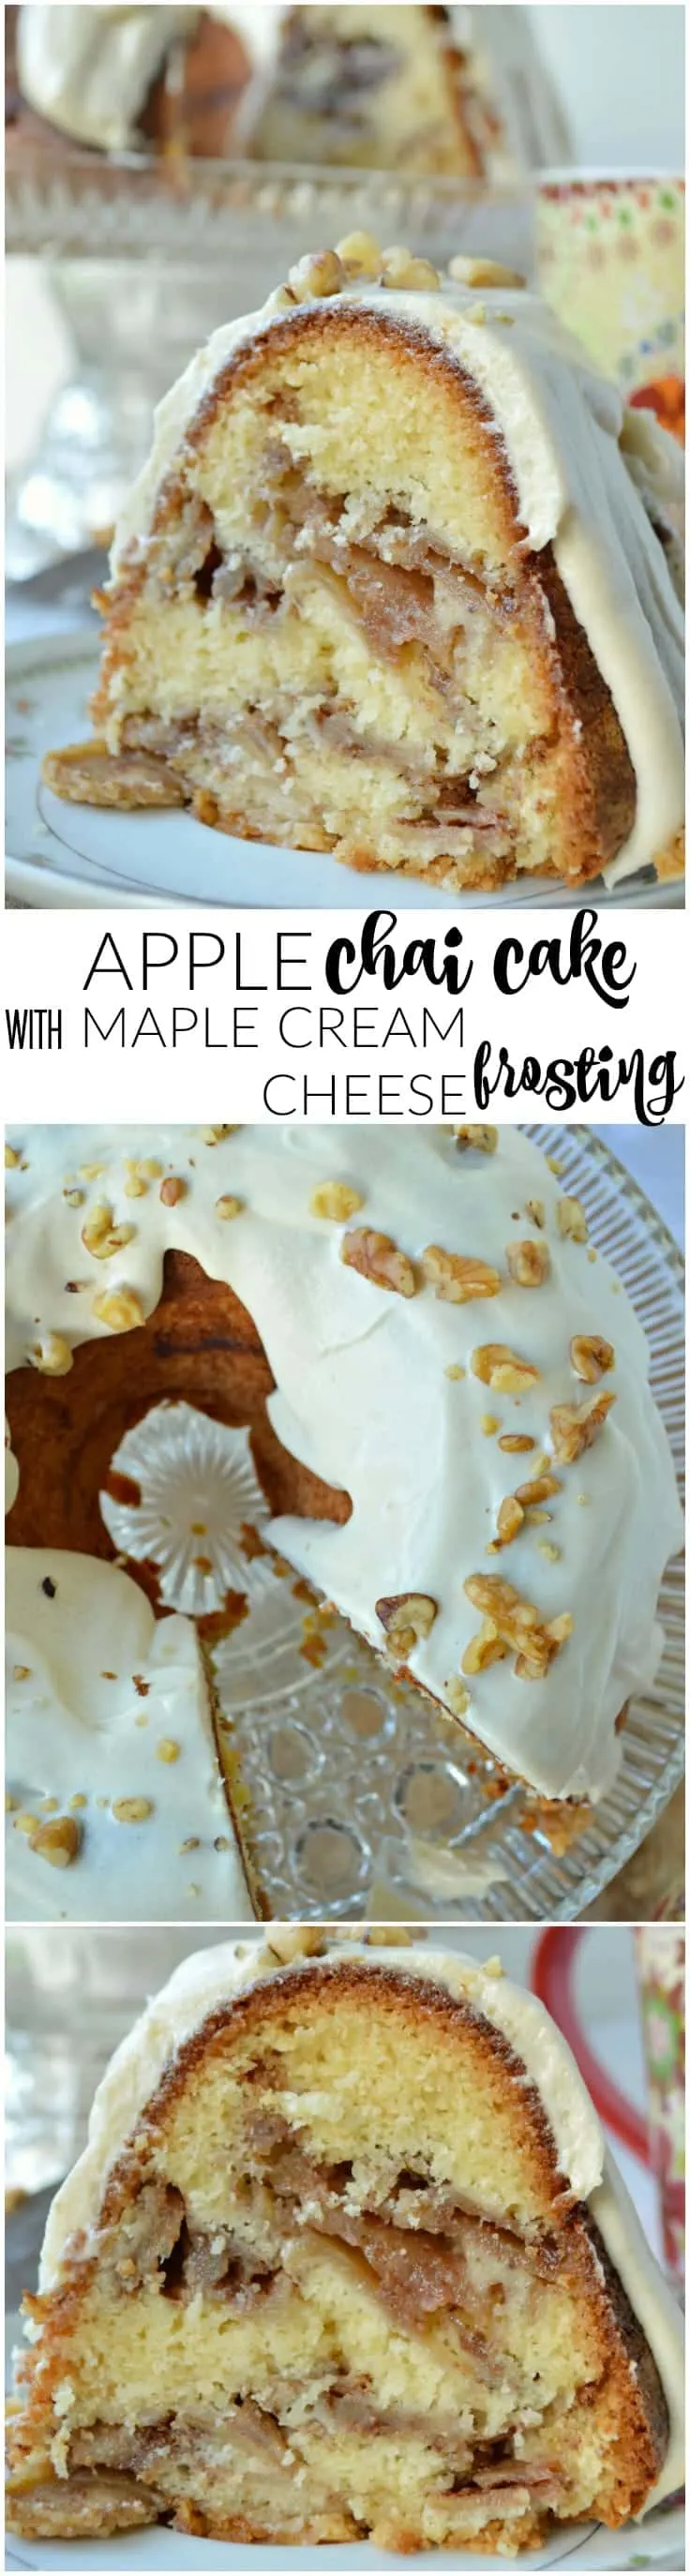 A dreamy Jewish apple cake with a spicy chai-inspired twist! This Apple Chai Cake is fall dessert perfection.